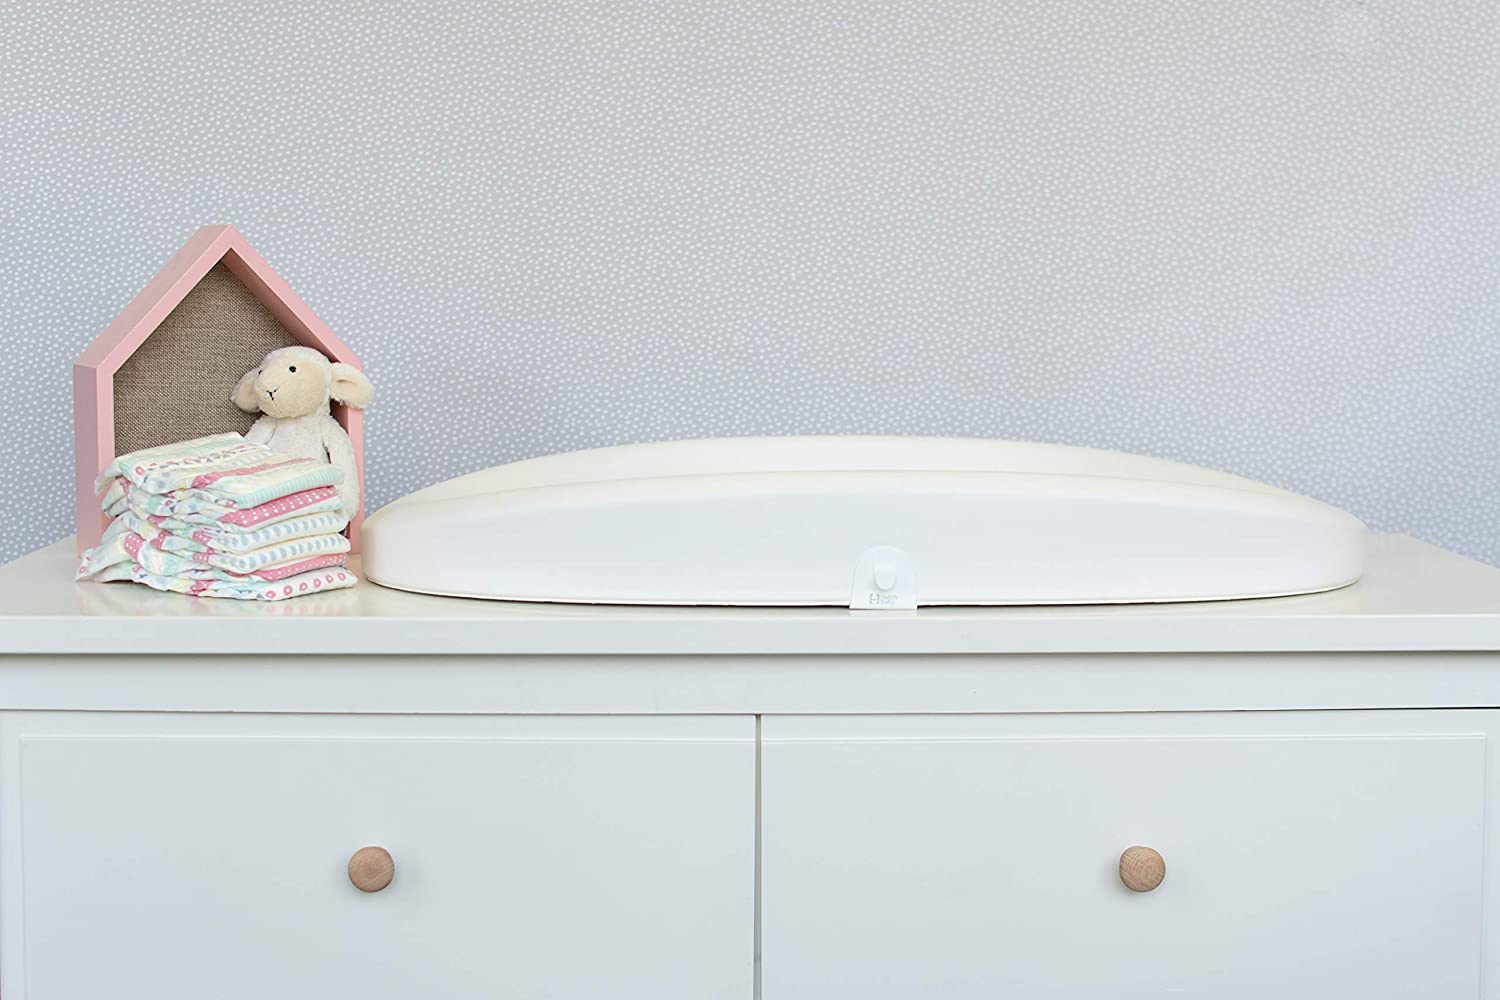 Grow by Hatch Baby is a smart changing pad that tracks a baby's data